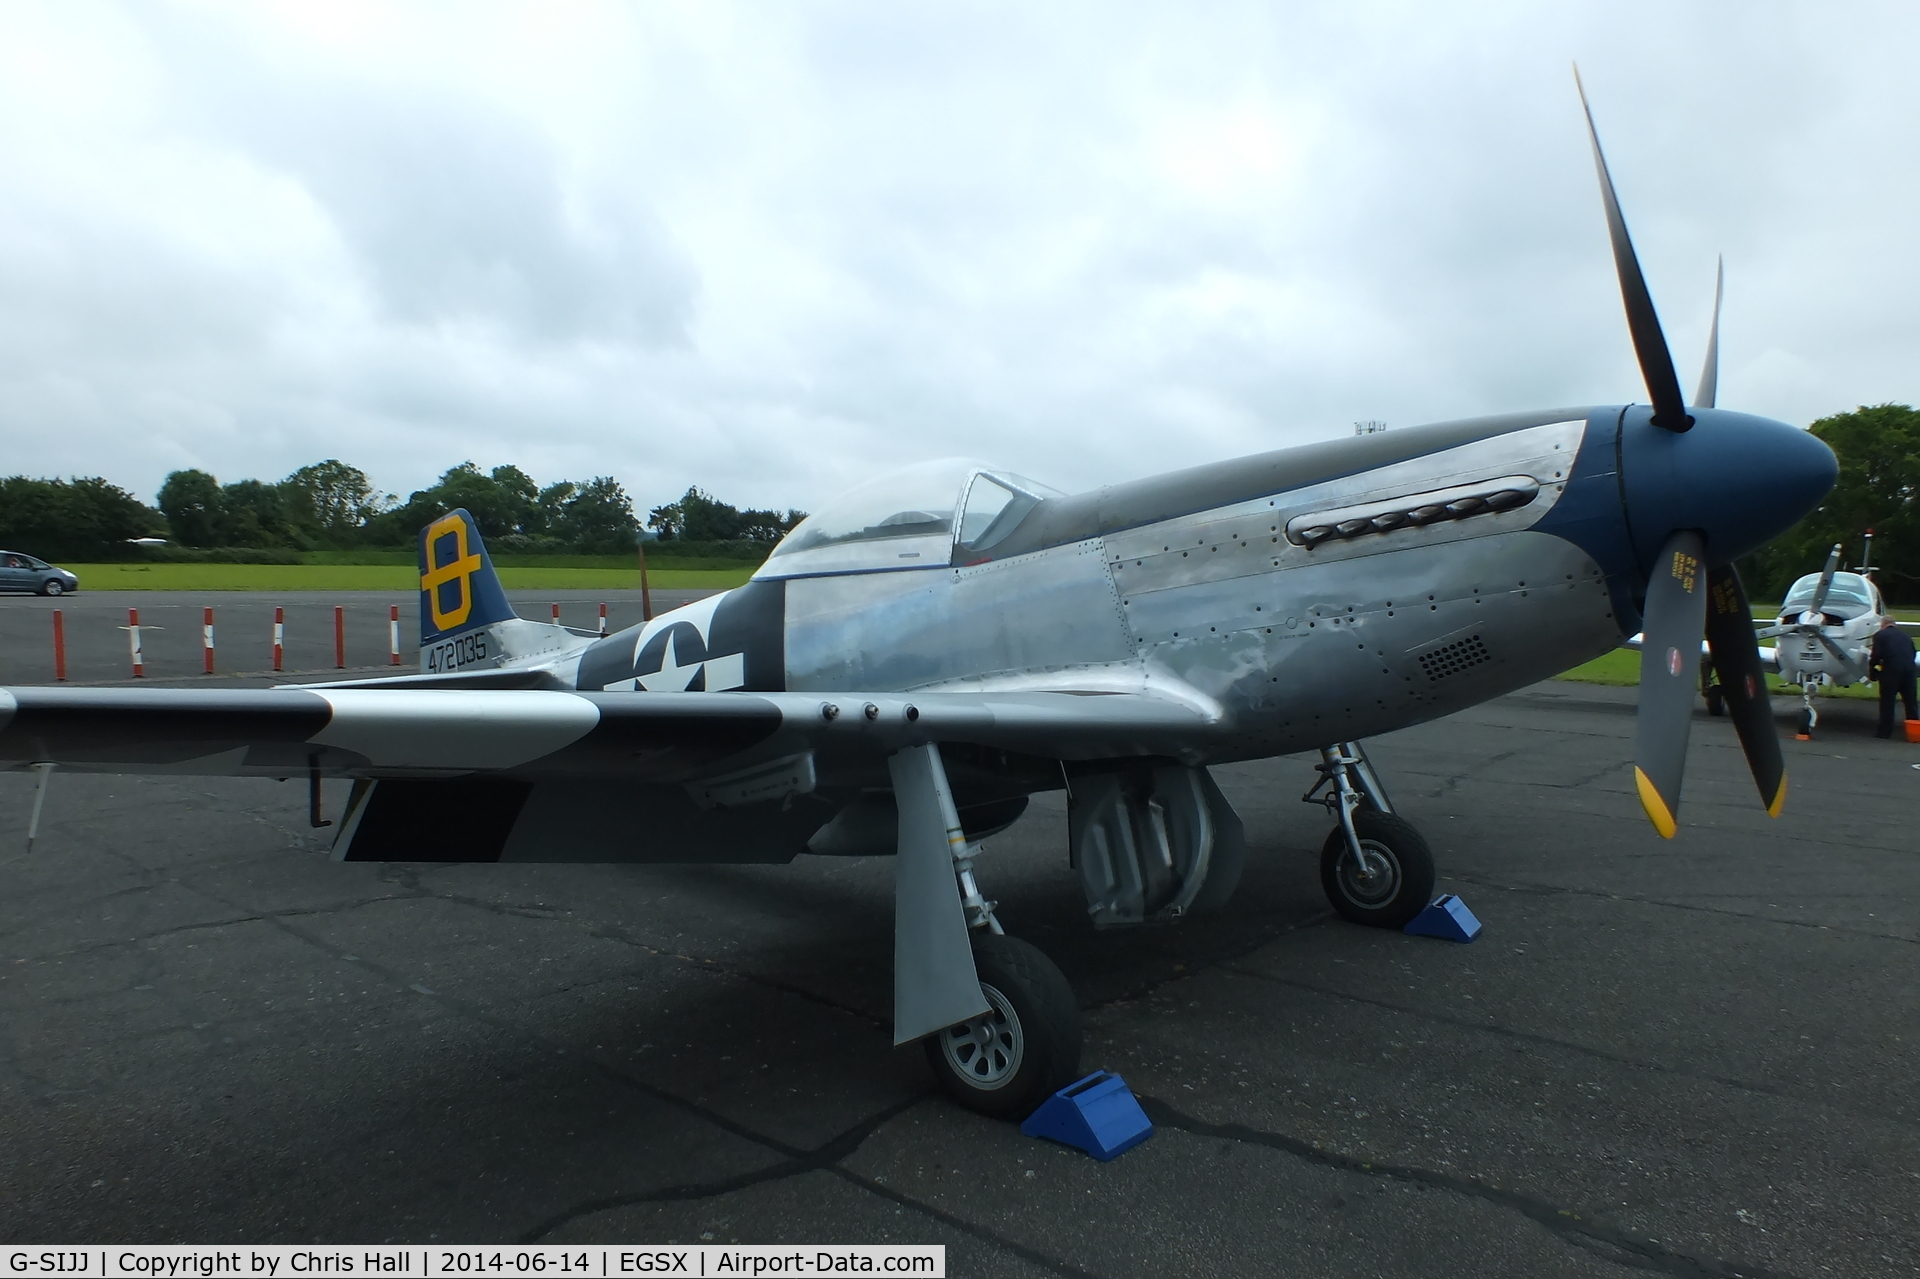 G-SIJJ, 1944 North American P-51D Mustang C/N 122-31894 (44-72035), at the Air Britain fly in